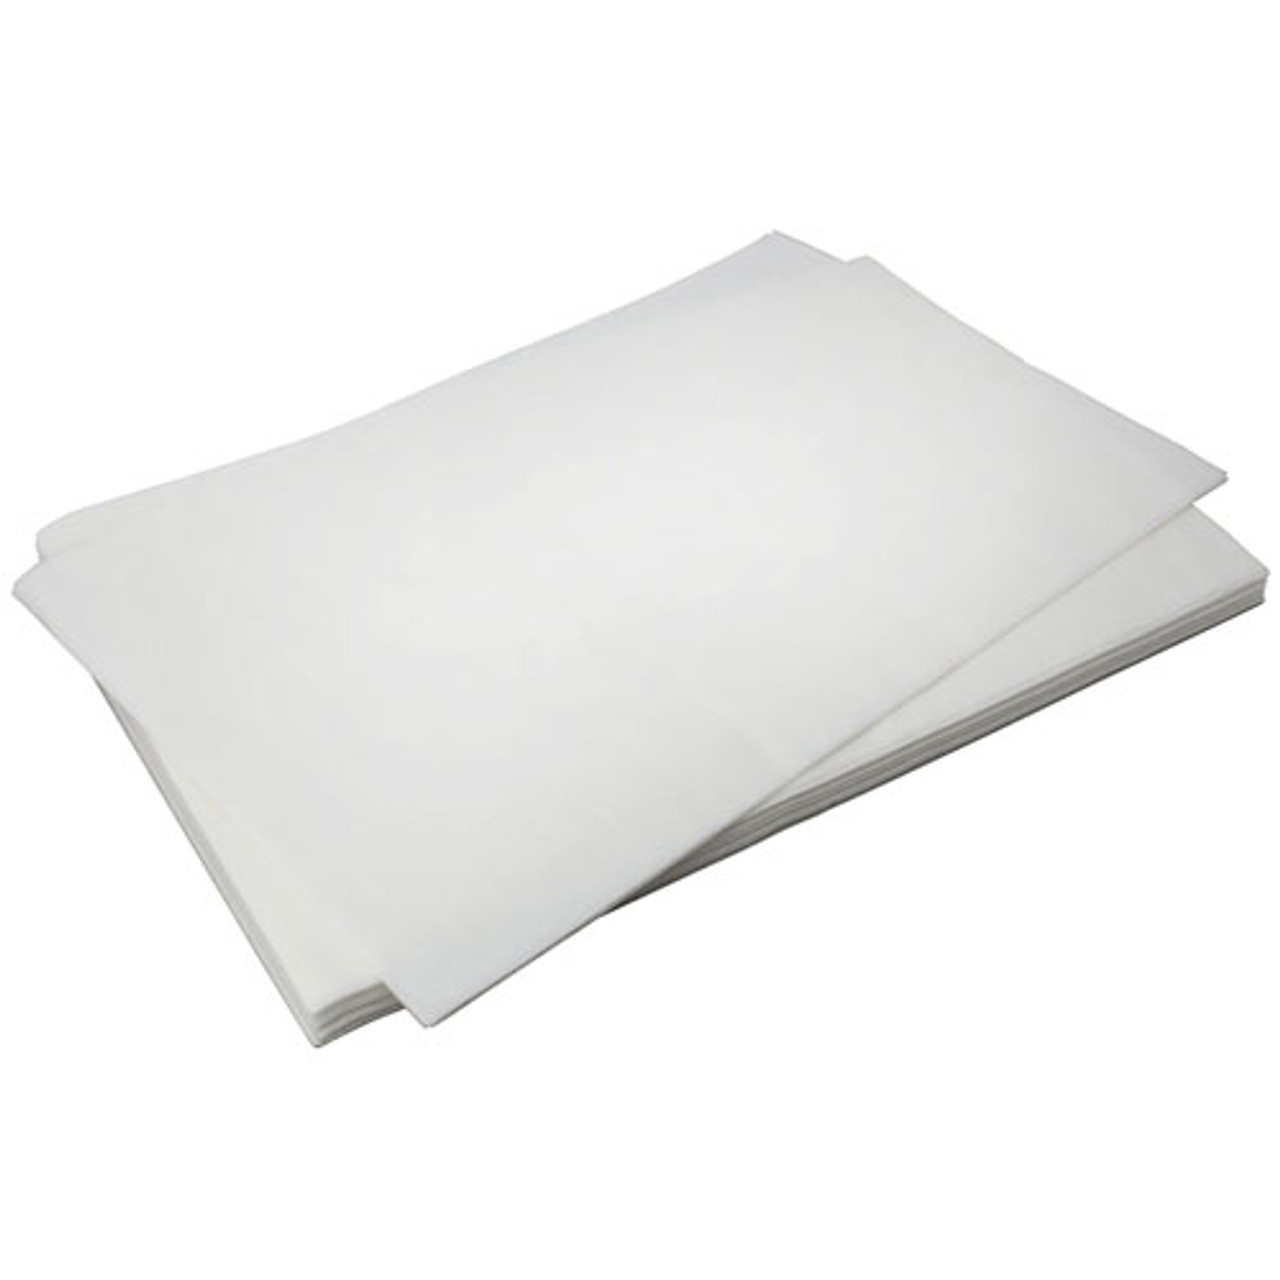 Filter Sheets 100Pk - Replacement Part For Frymaster FM8030154